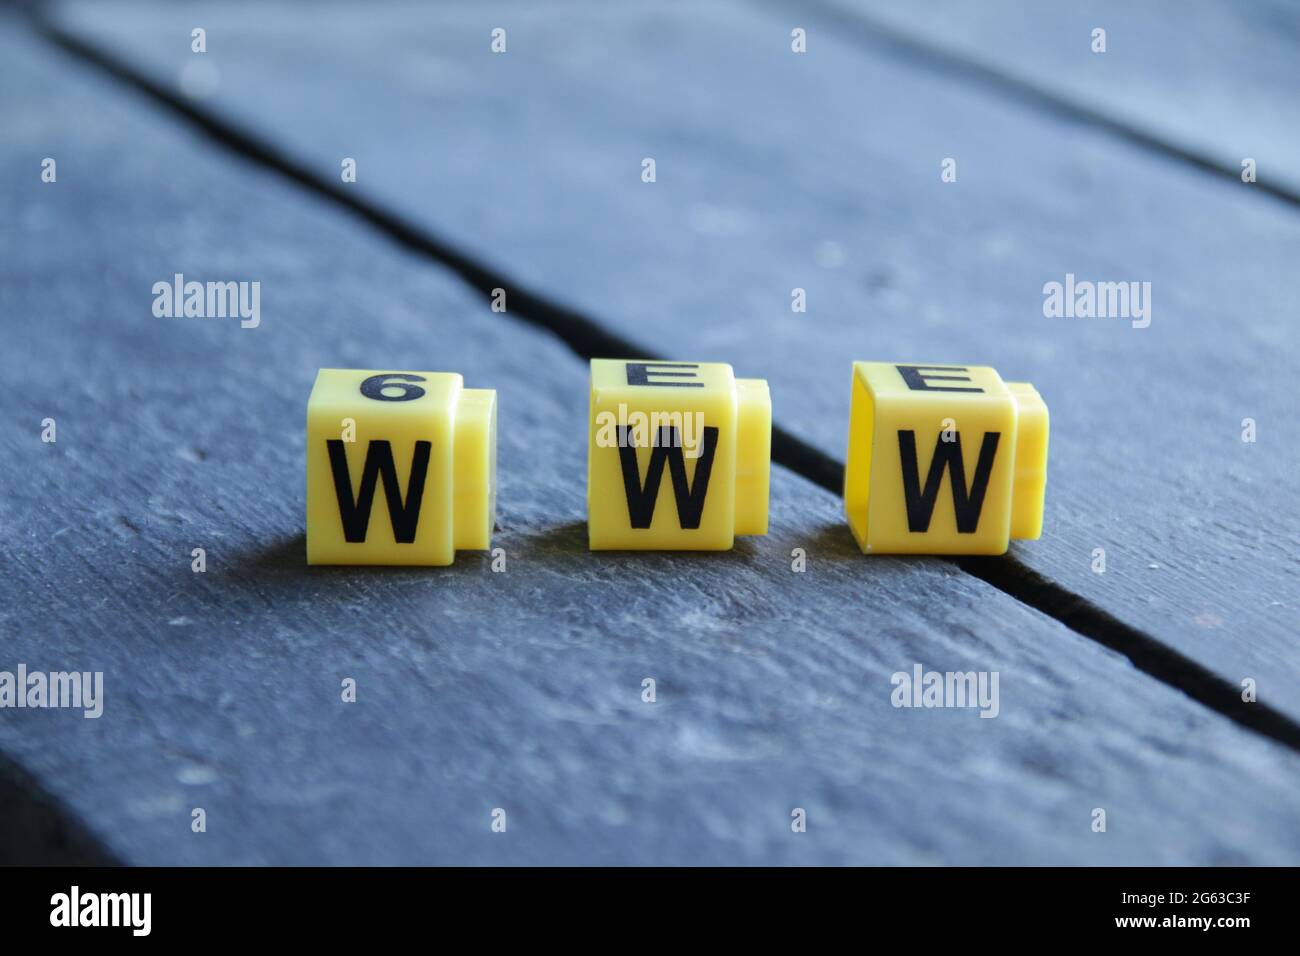 Text Www. Yellow letters on vintage background. Stock Photo